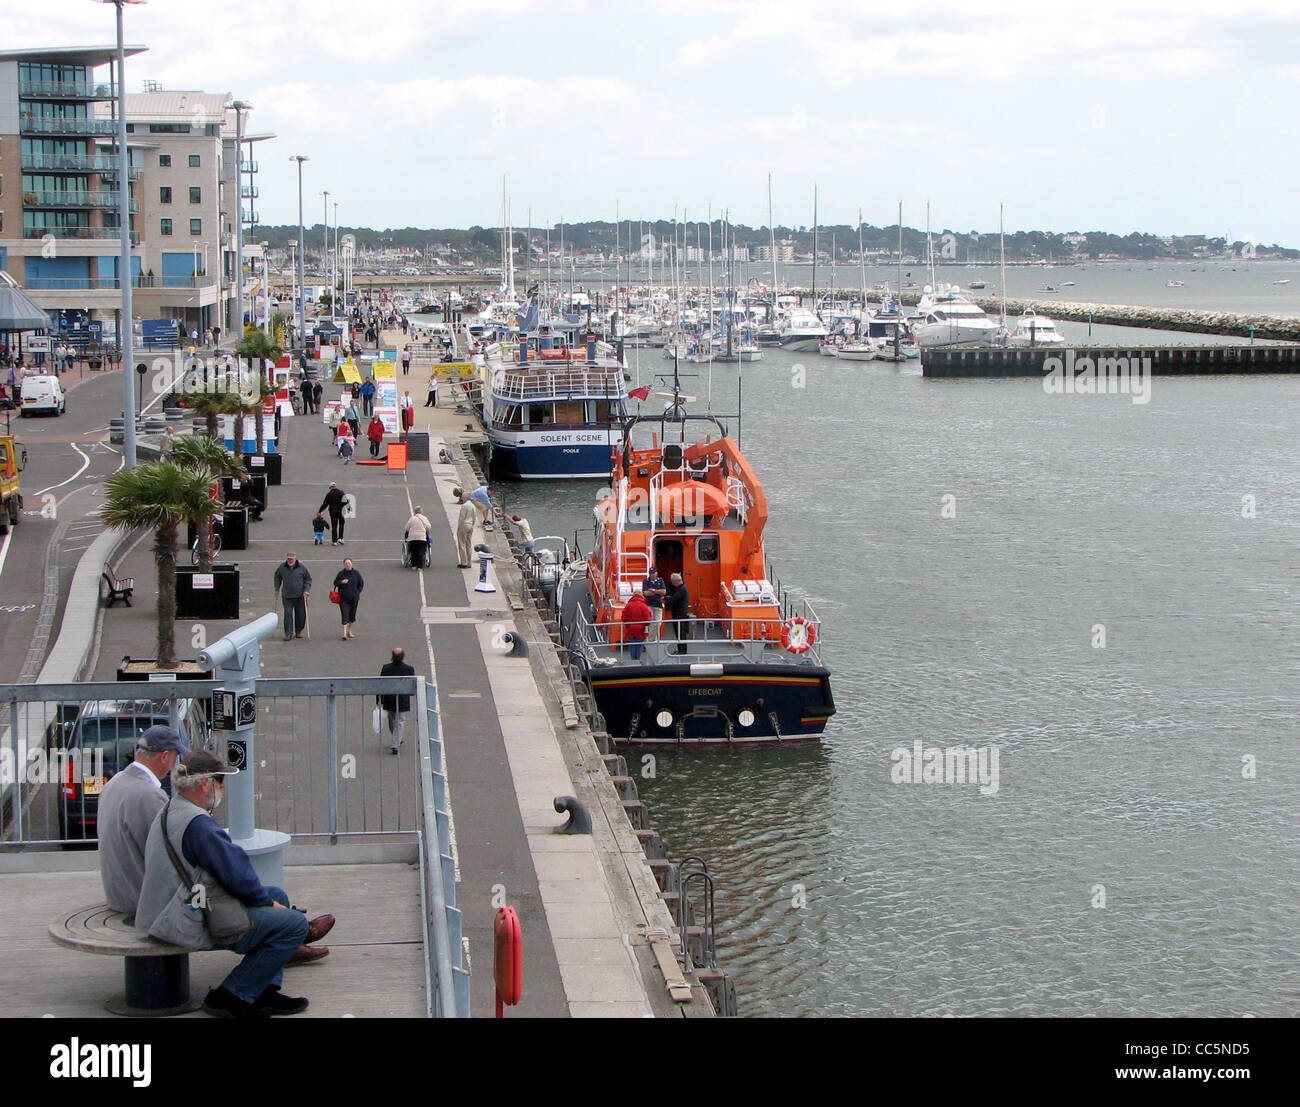 The Quay at Poole, Dorset, England. The orange boat is a Severn class lifeboat (registration 17-31) on trials after refurbishmen Stock Photo